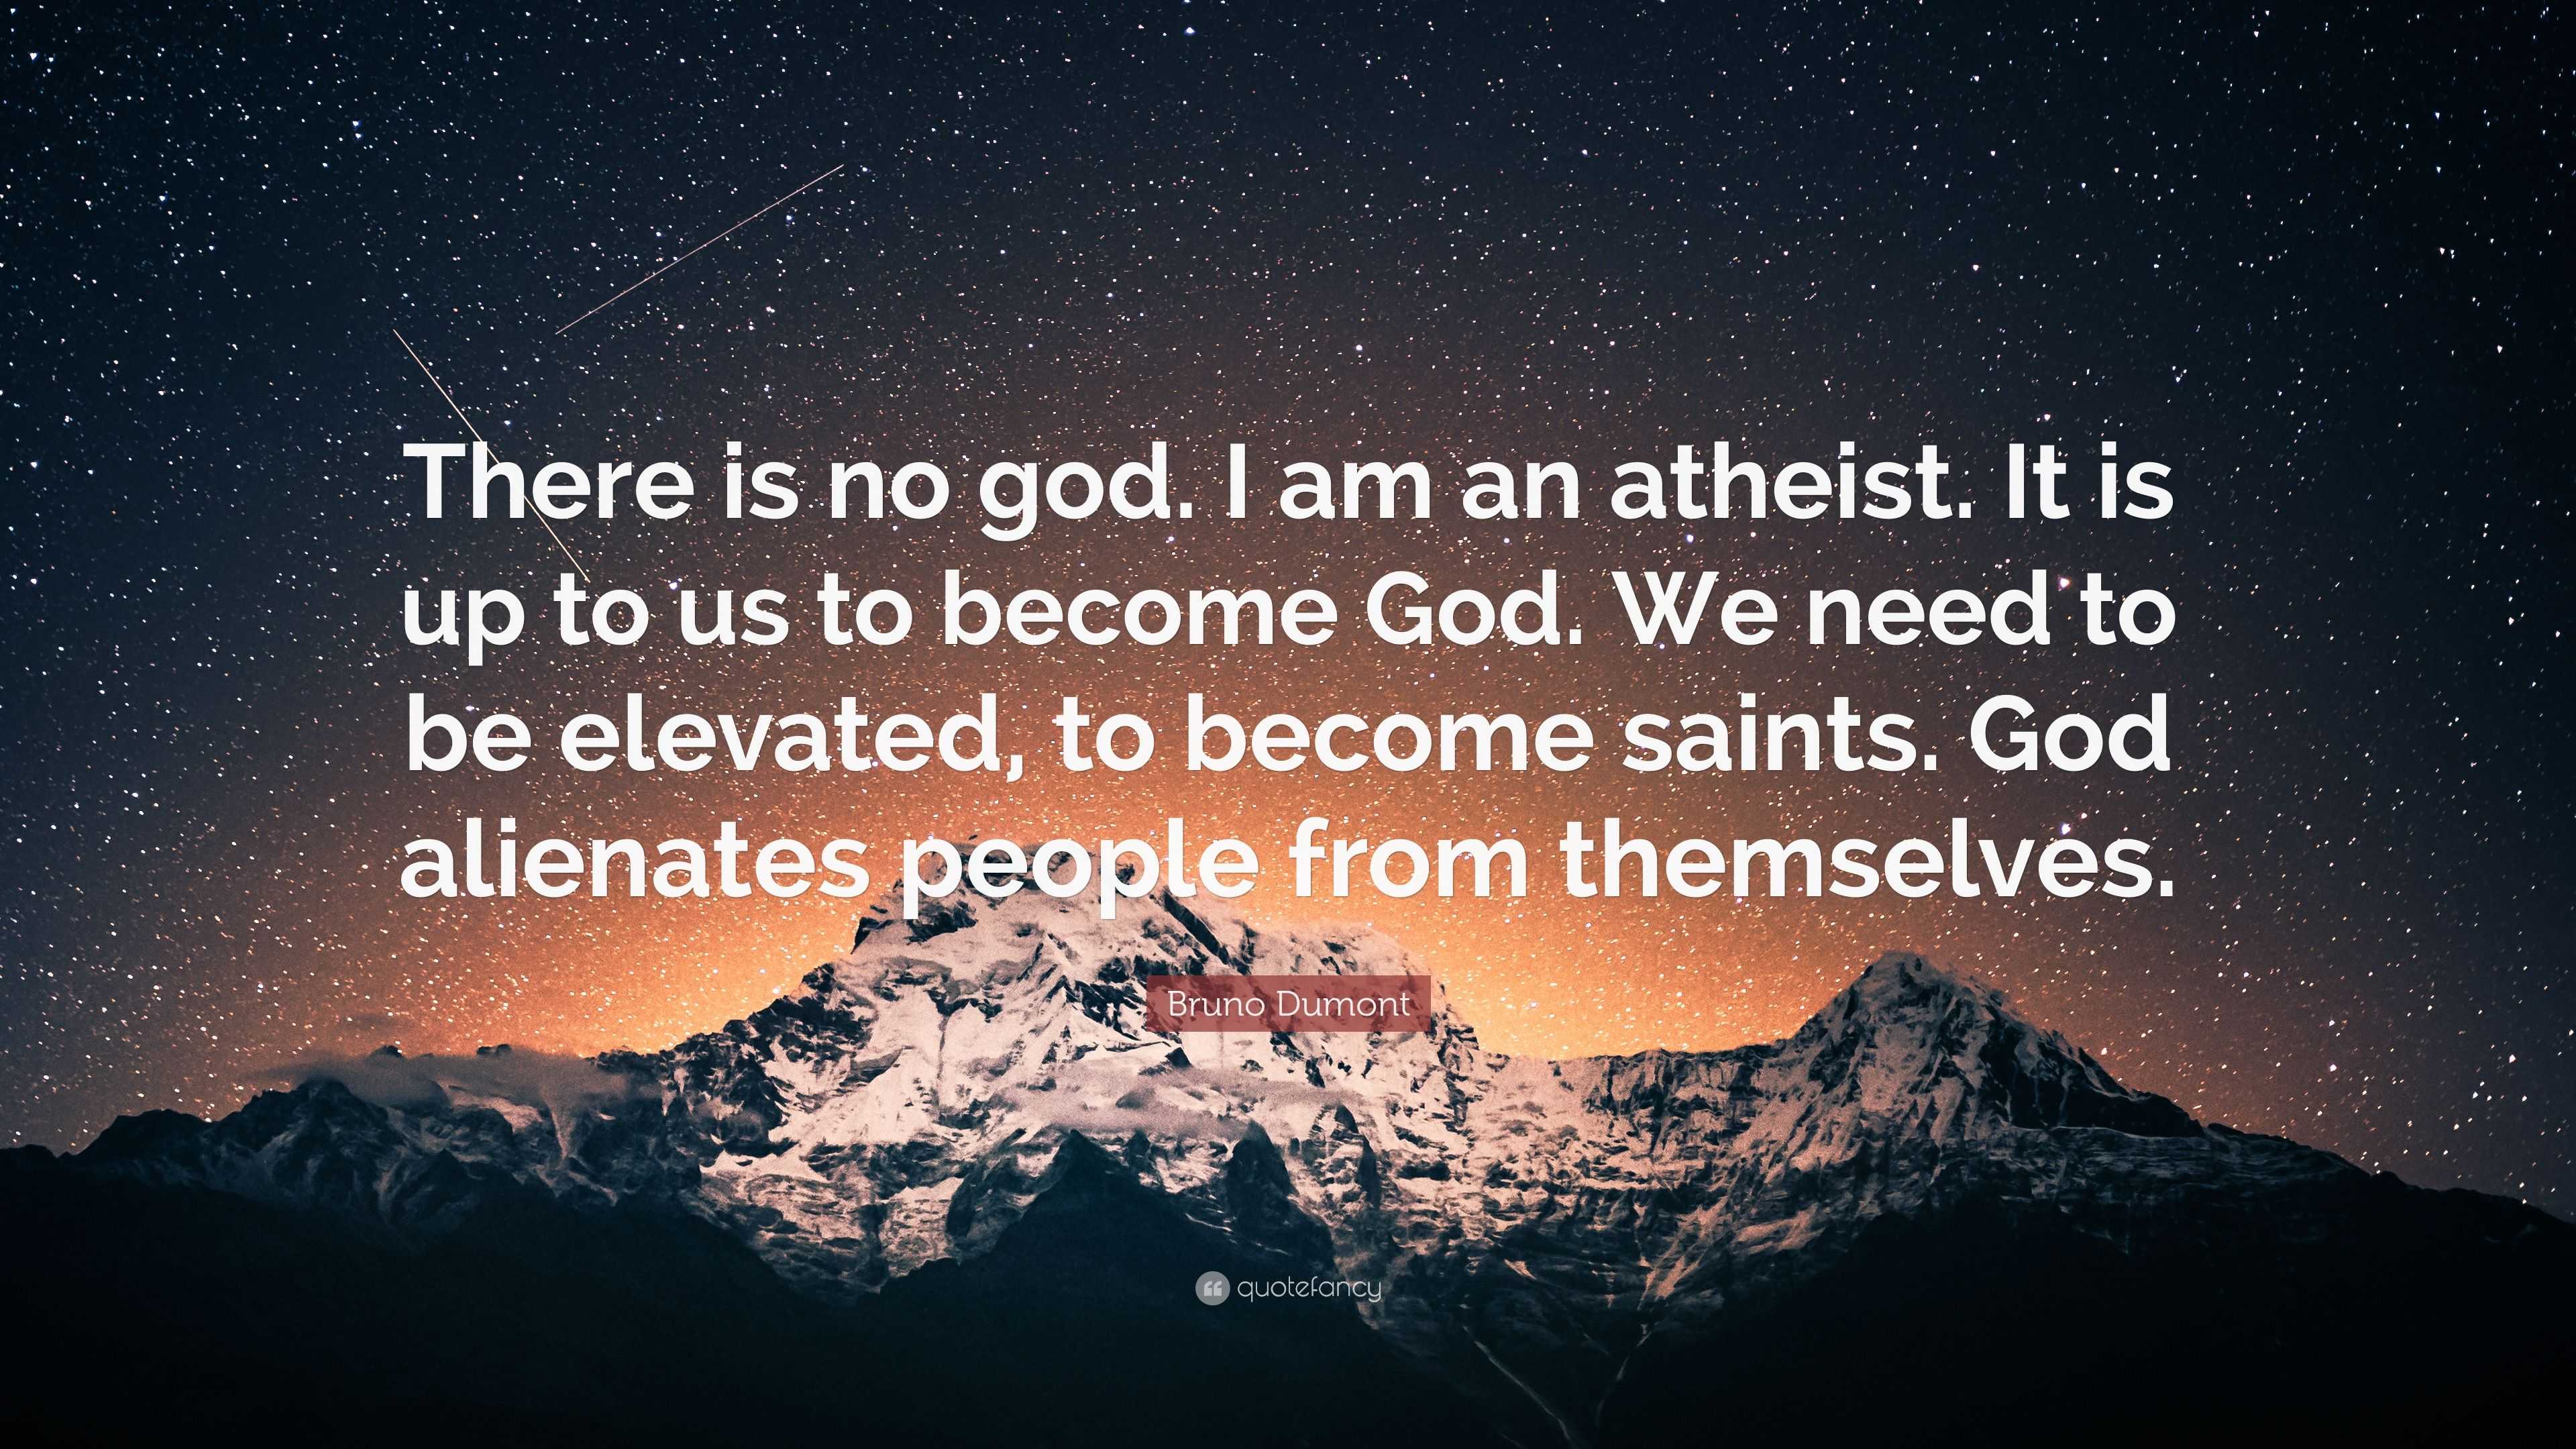 Bruno Dumont Quote There Is No God I Am An Atheist It Is Up To Us To Become God We Need To Be Elevated To Become Saints God Alienates